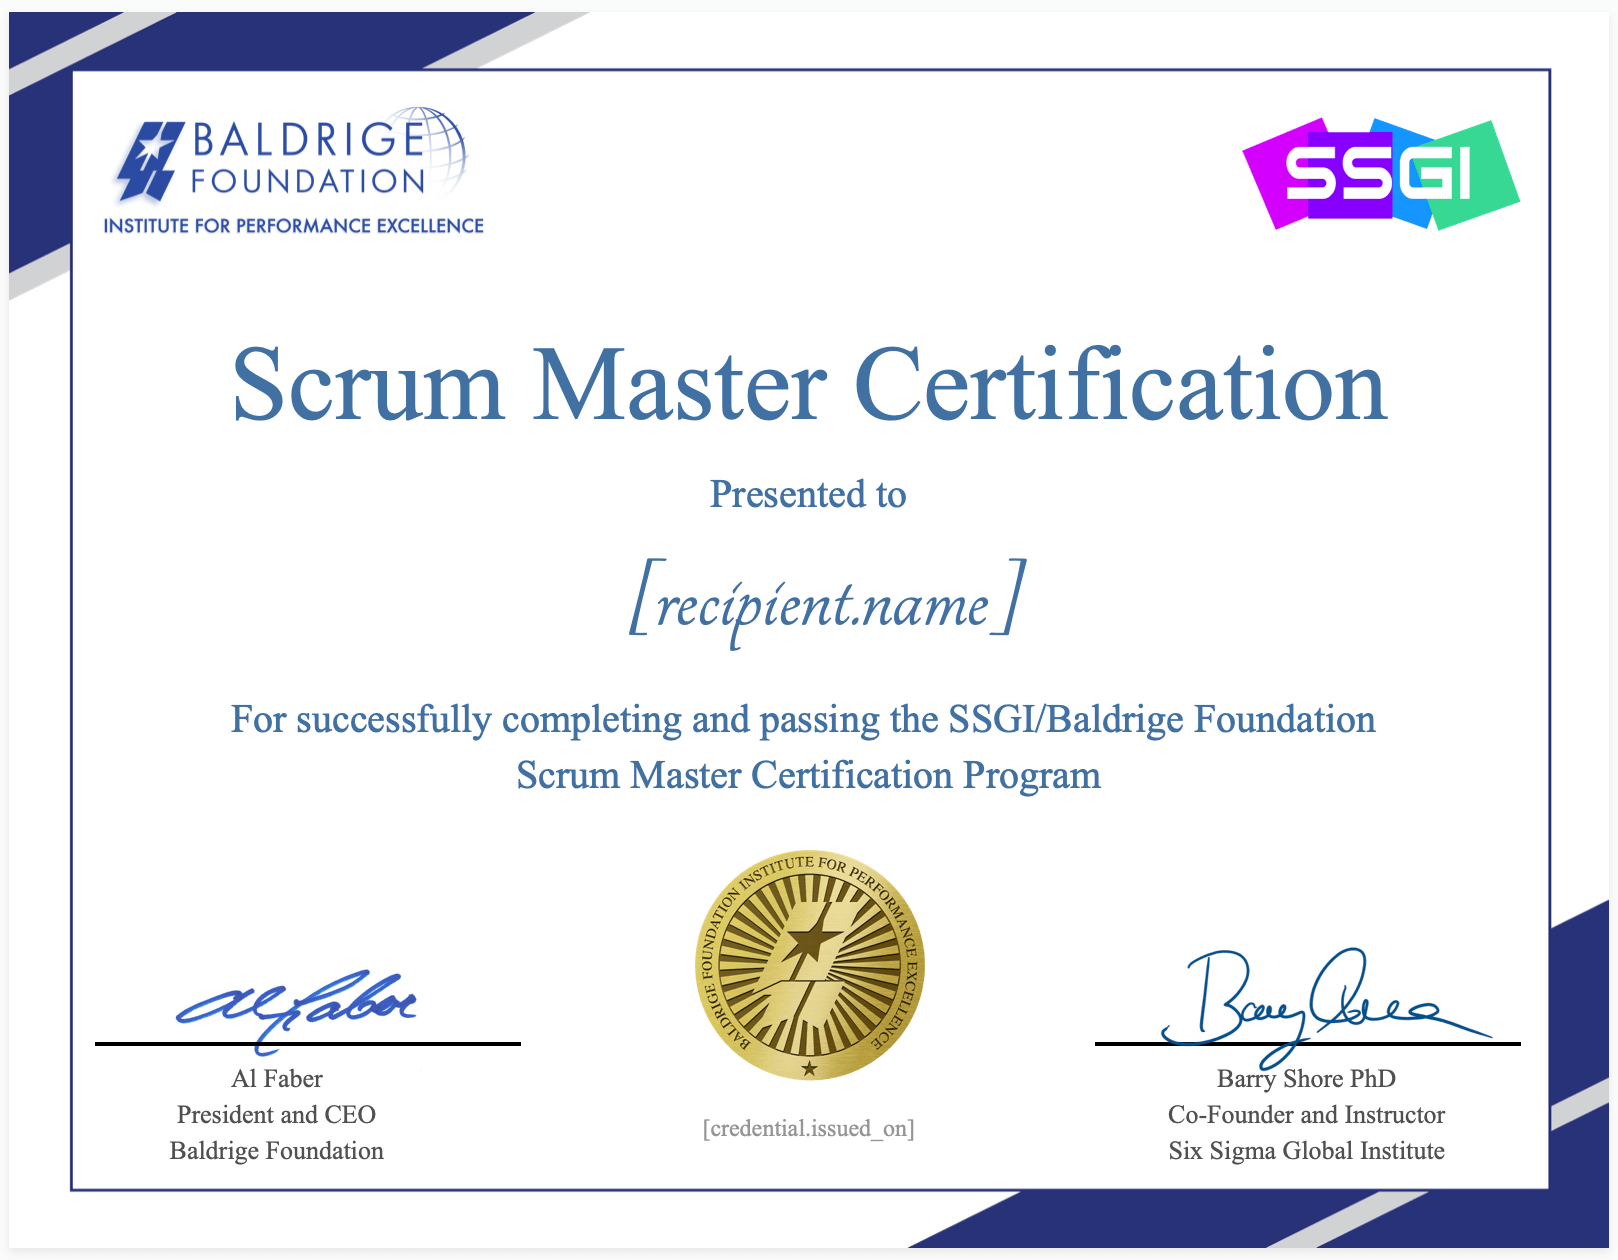 Baldrige Scrum Master Certification - Six Sigma Certification and ...